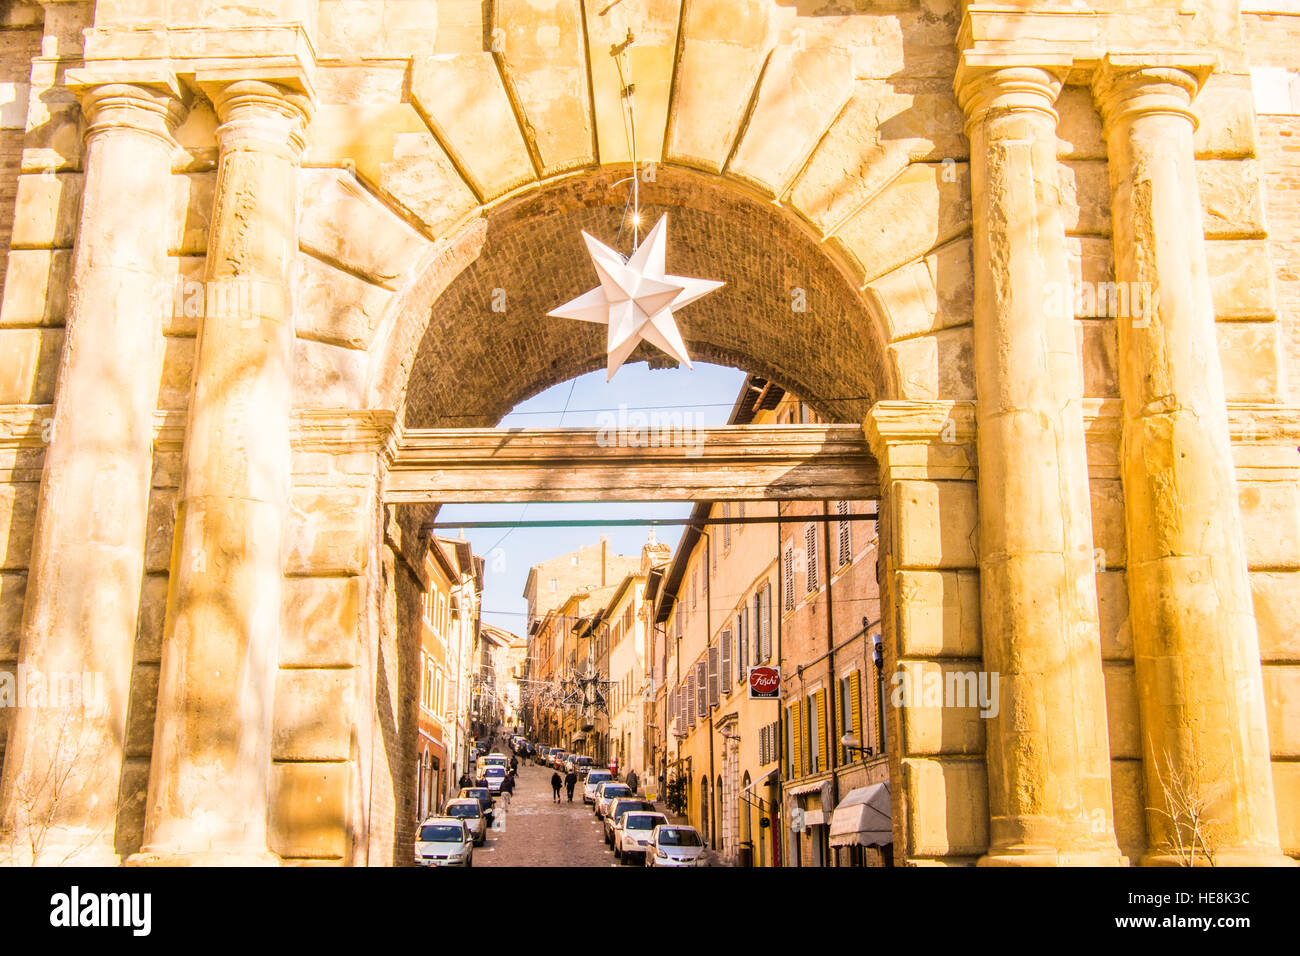 Christmas Star hangs from gate 'Porta Valbona' in the walled Medieval city of Urbino, Marche Region, Italy. Street 'via Mazzini' behind. Stock Photo